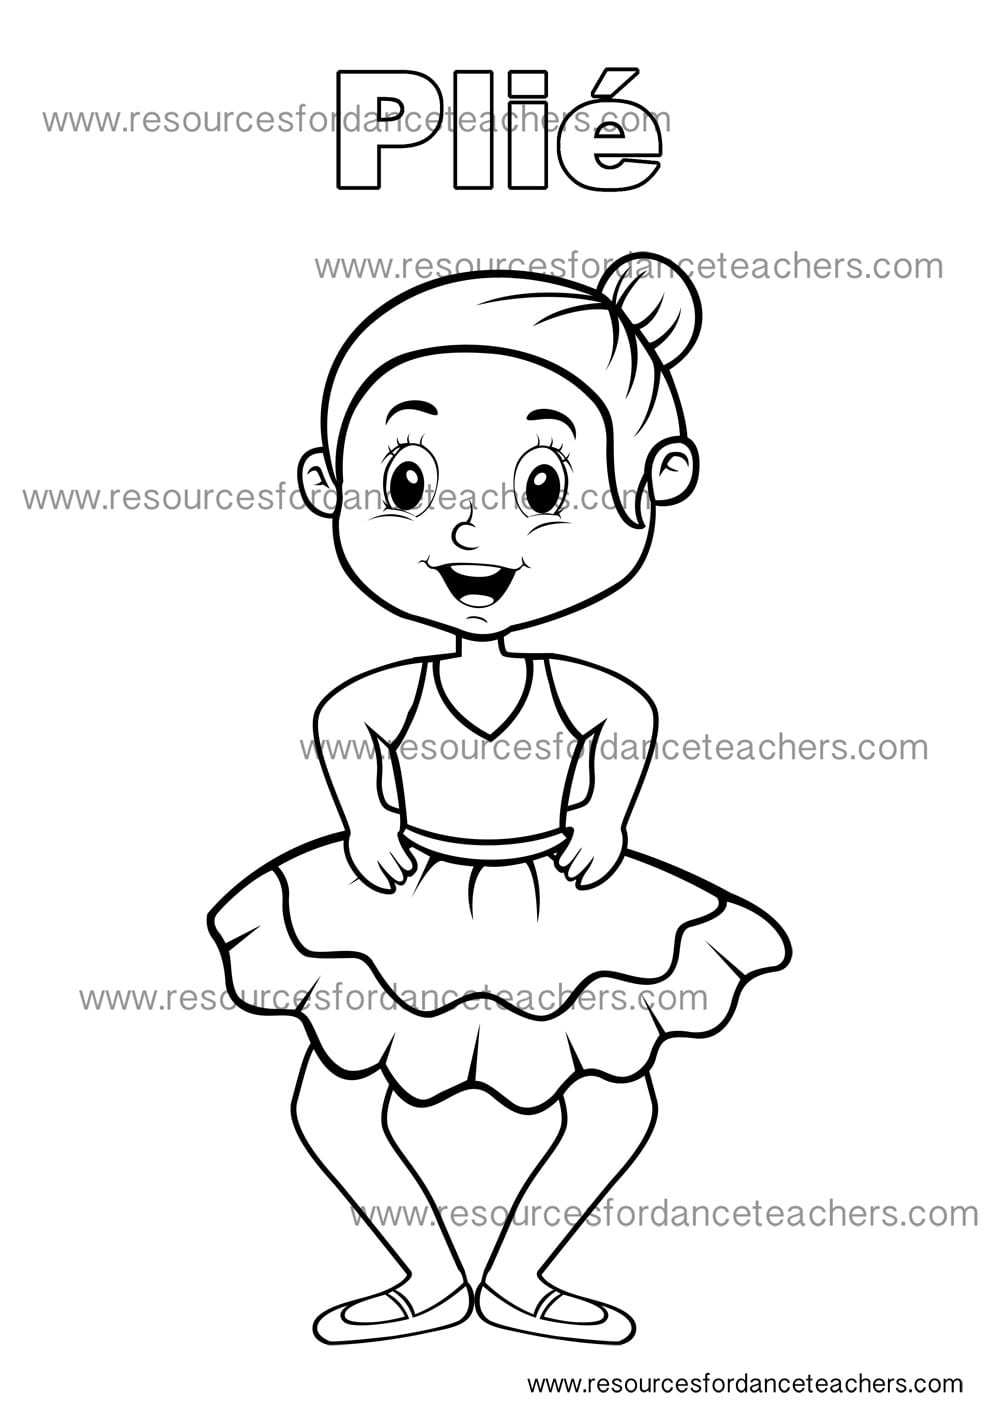 Preschool Dance colouring pages value pack - Resources for ...